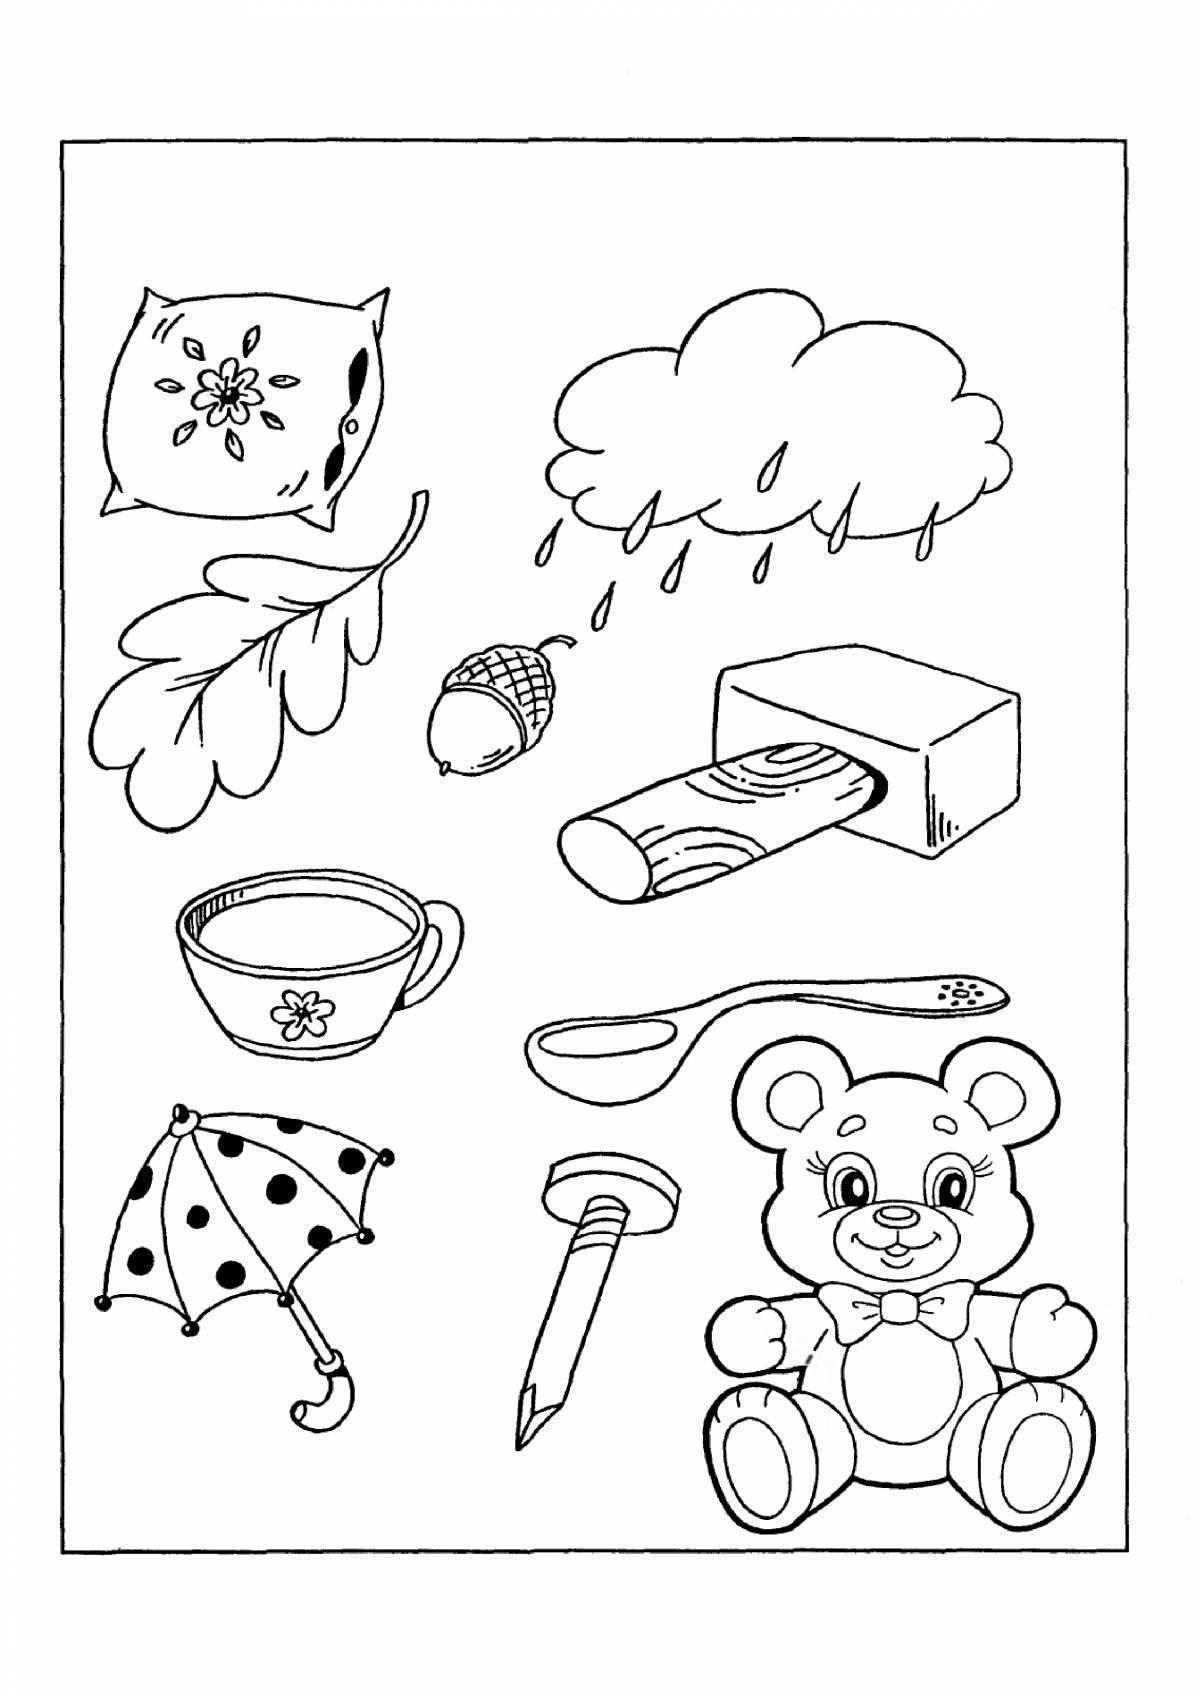 Stimulating coloring book for children, educational 3 4